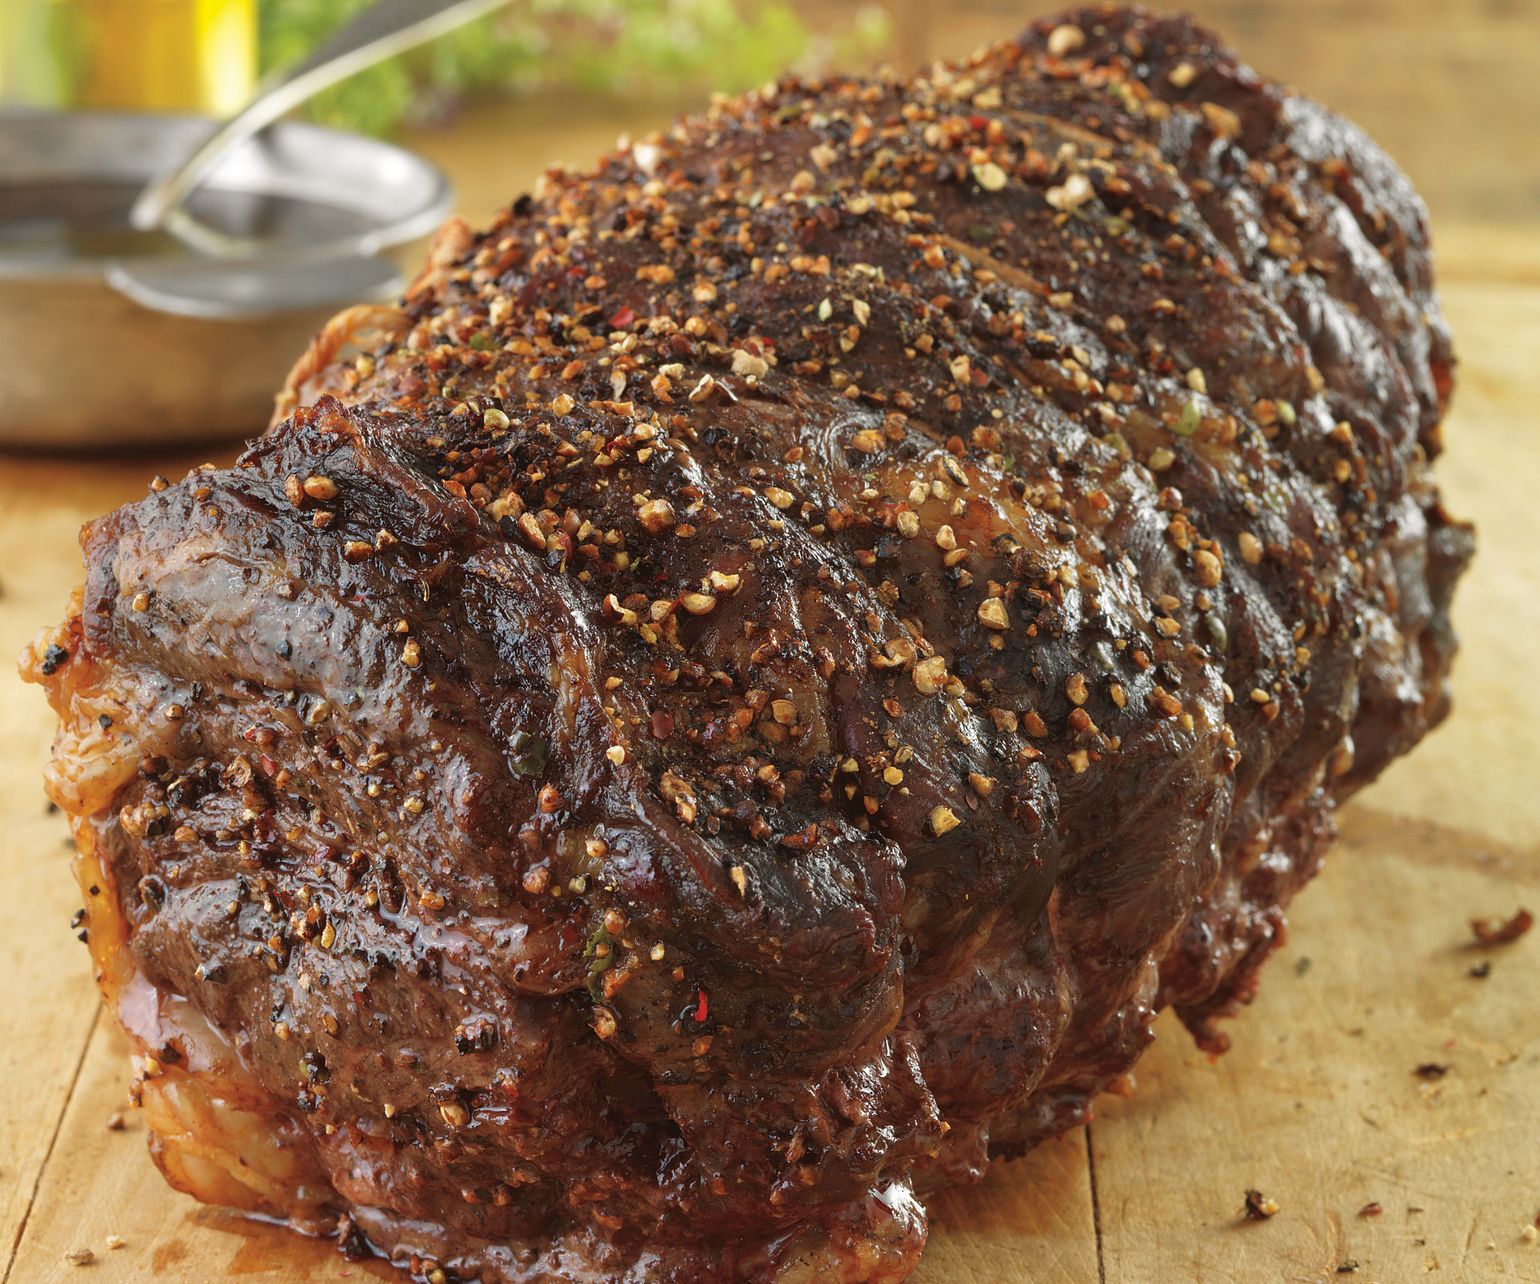 Garlic and Tri-Pepper-Crusted Beef Roast with Balsamic Sauce